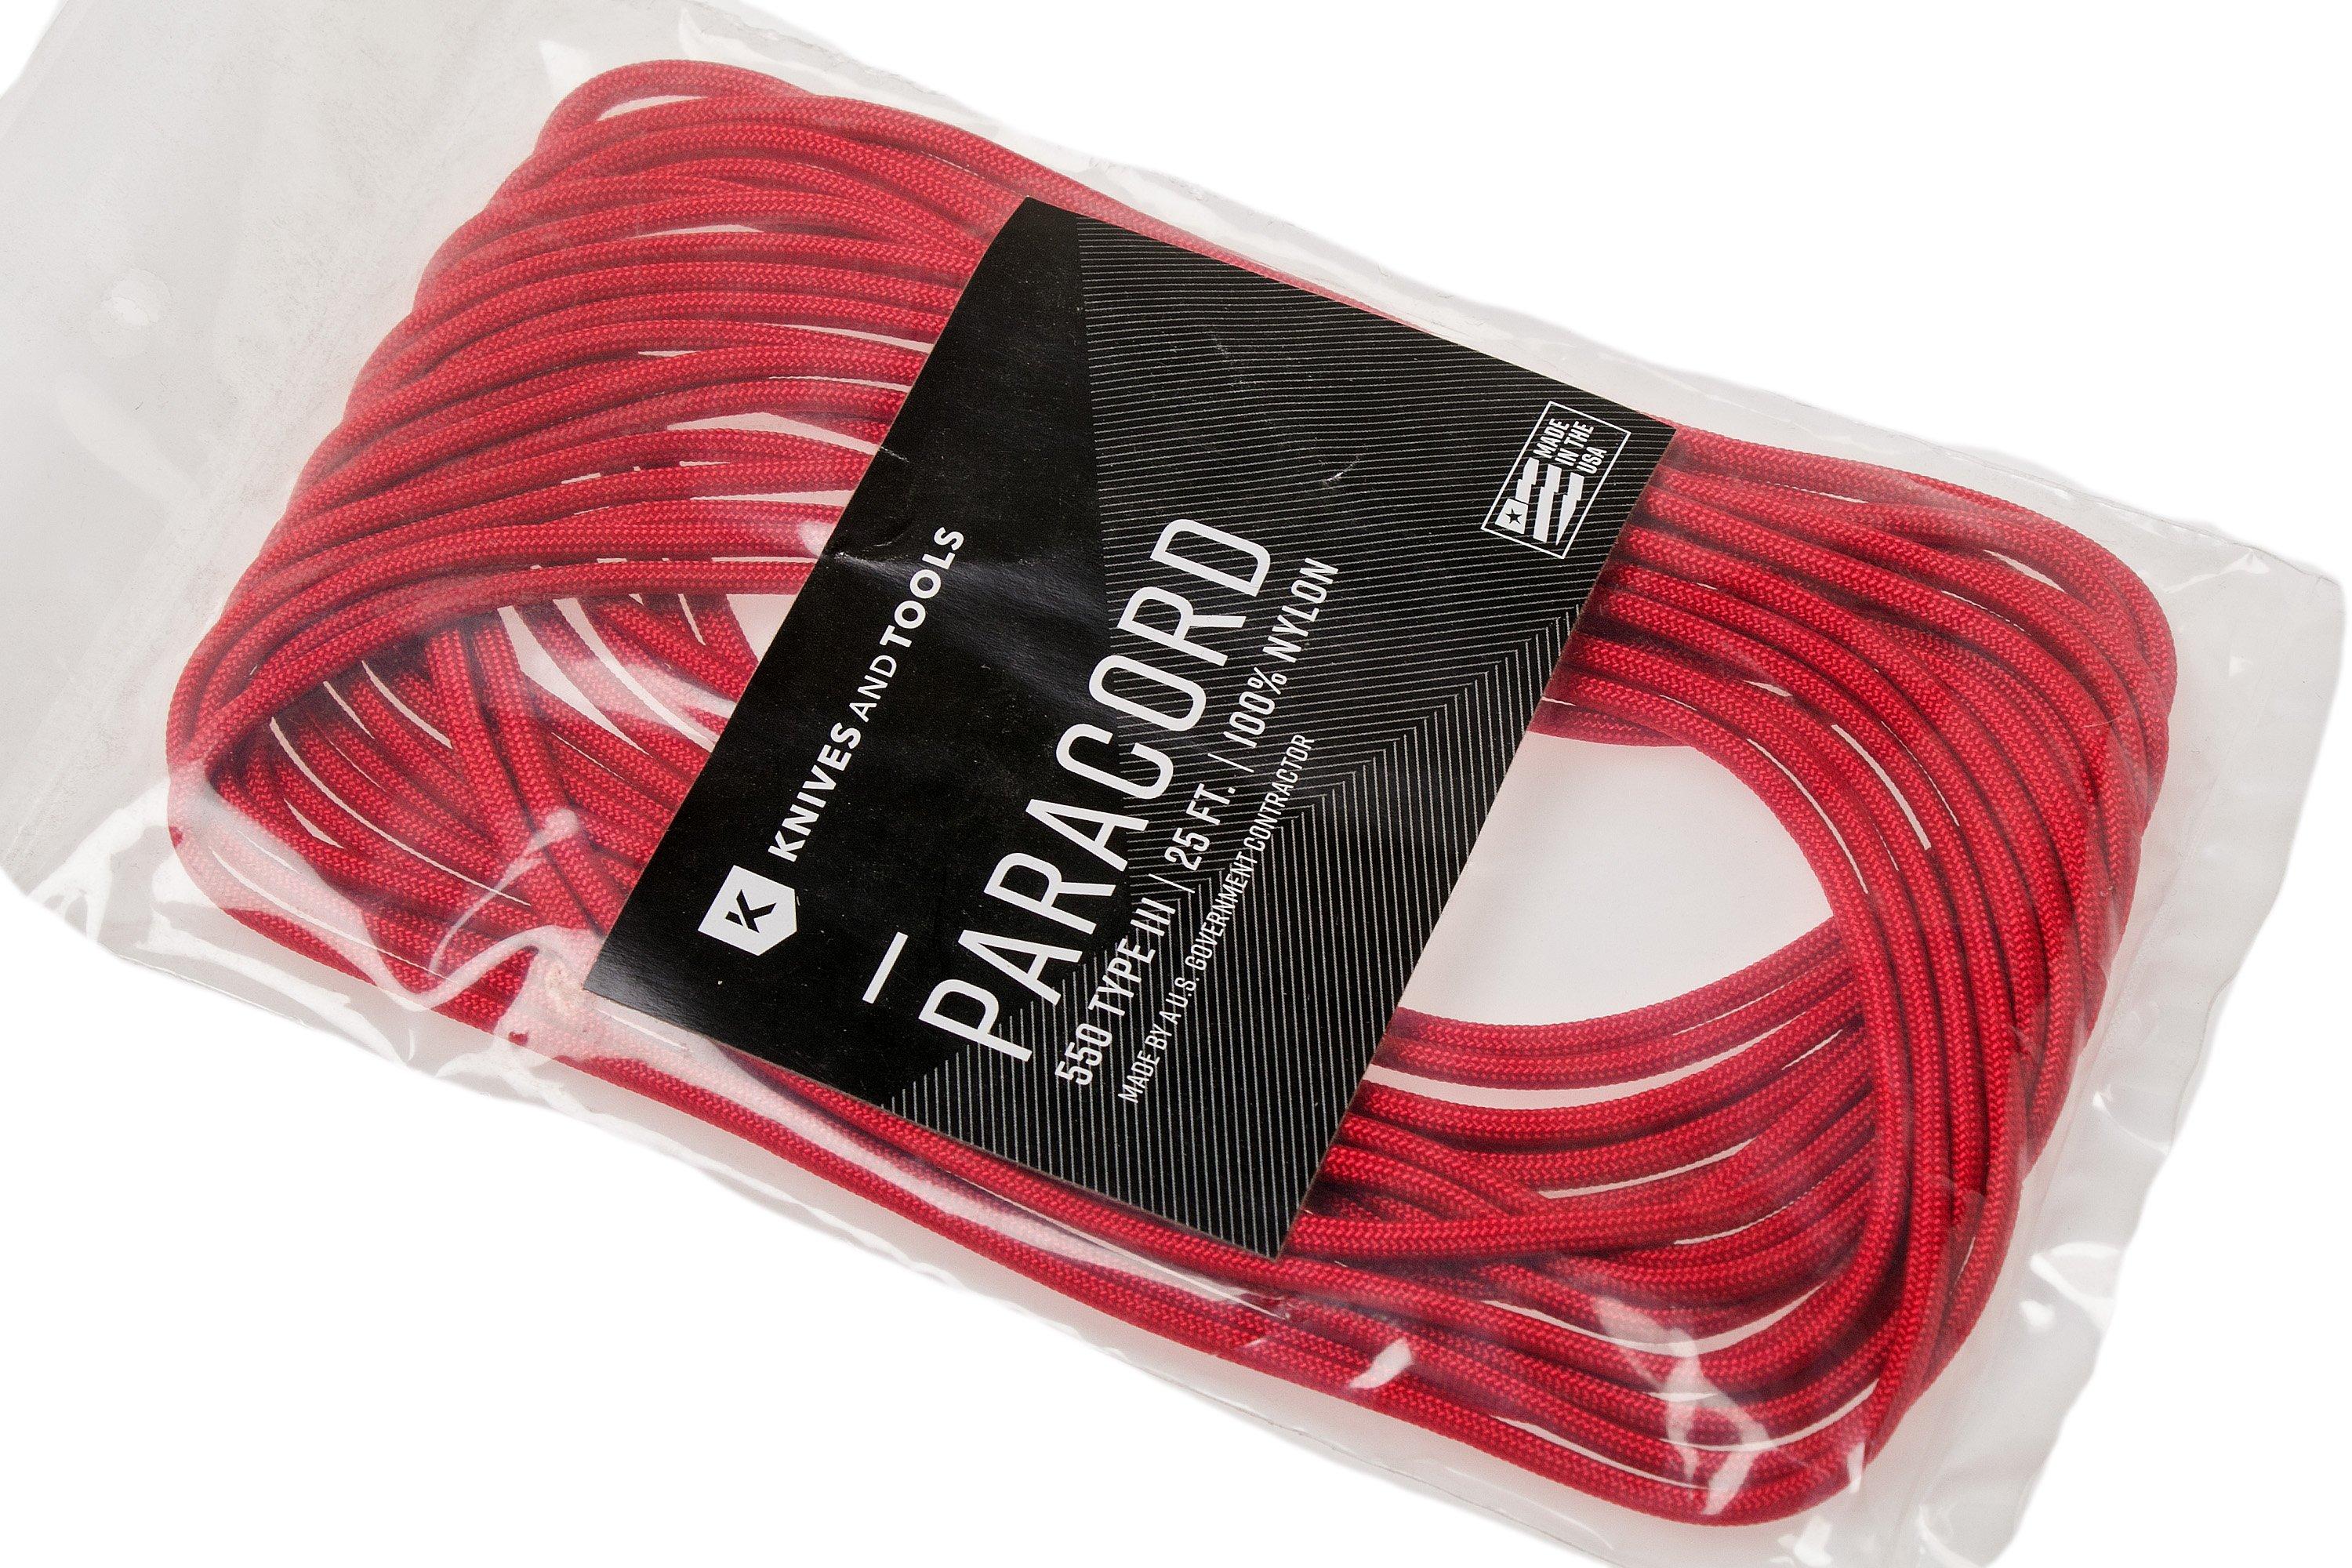 Knivesandtools 550 paracord type III, colore: rosso imperiale, 25 ft (7,62  m)